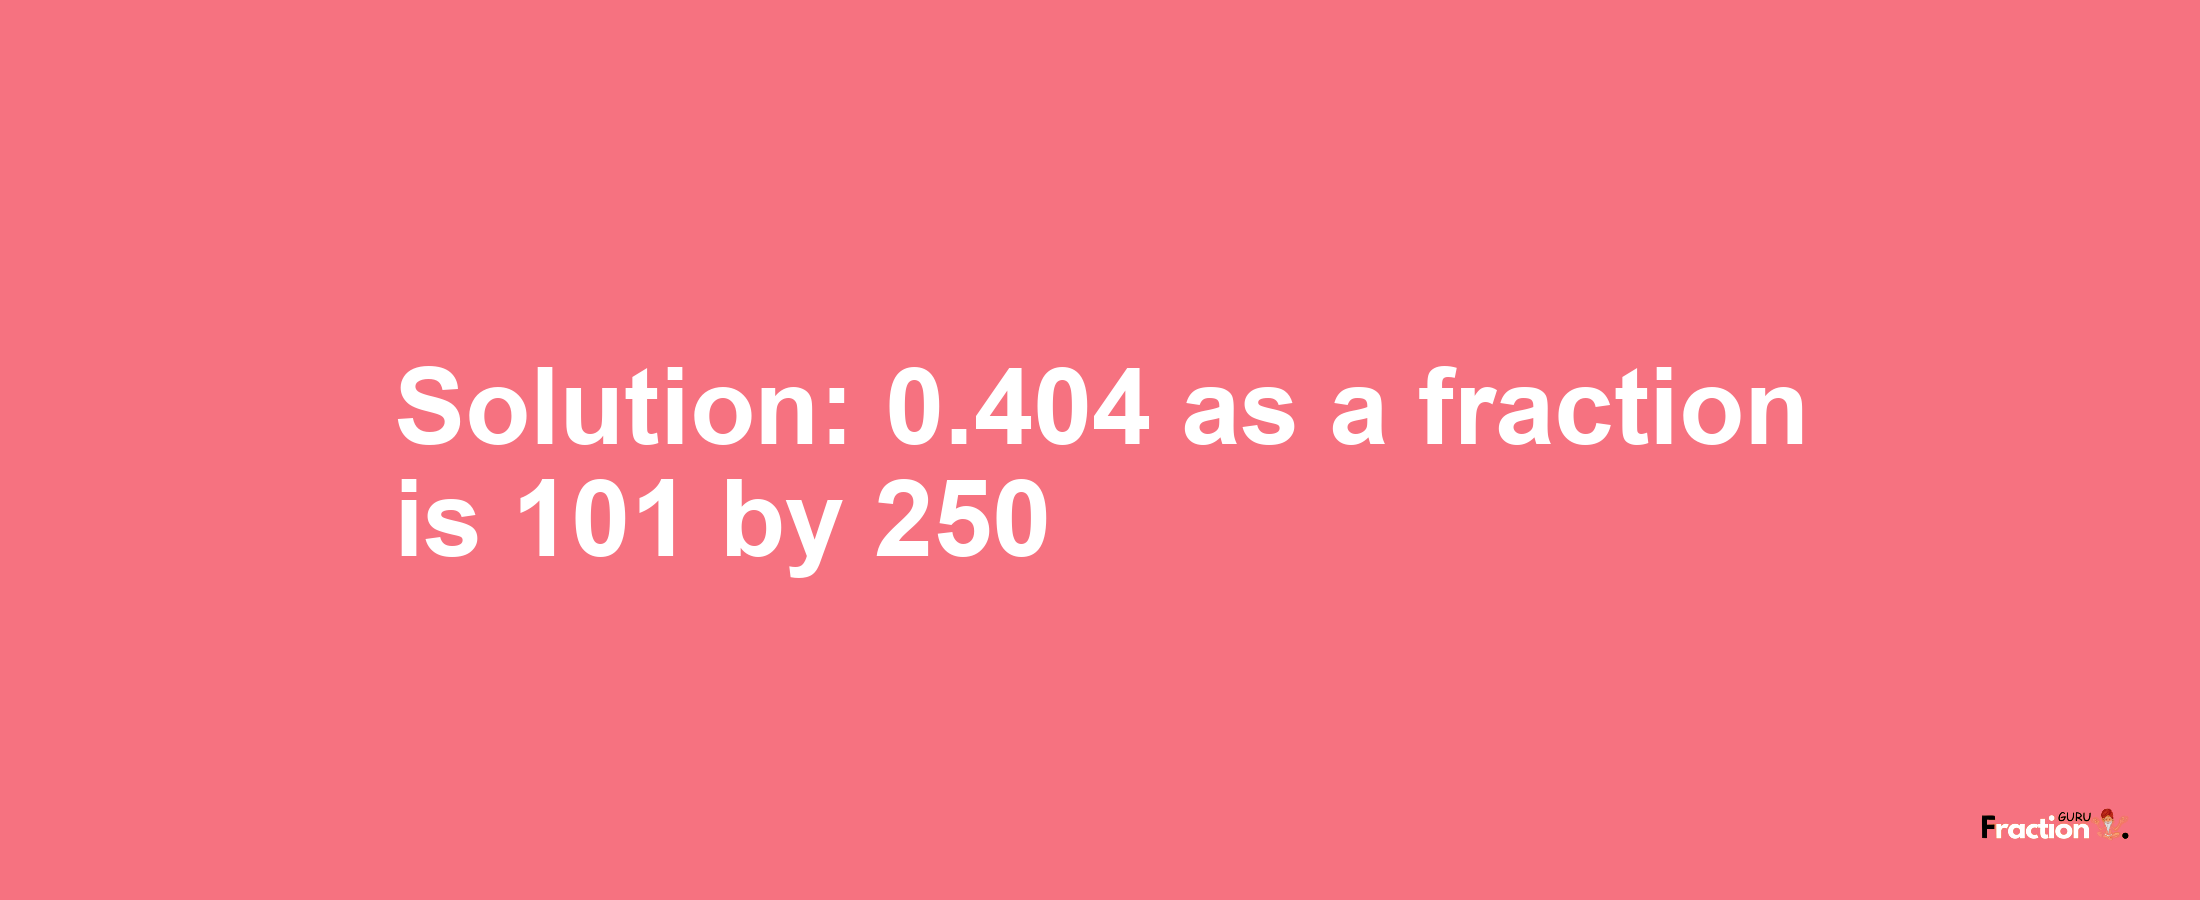 Solution:0.404 as a fraction is 101/250